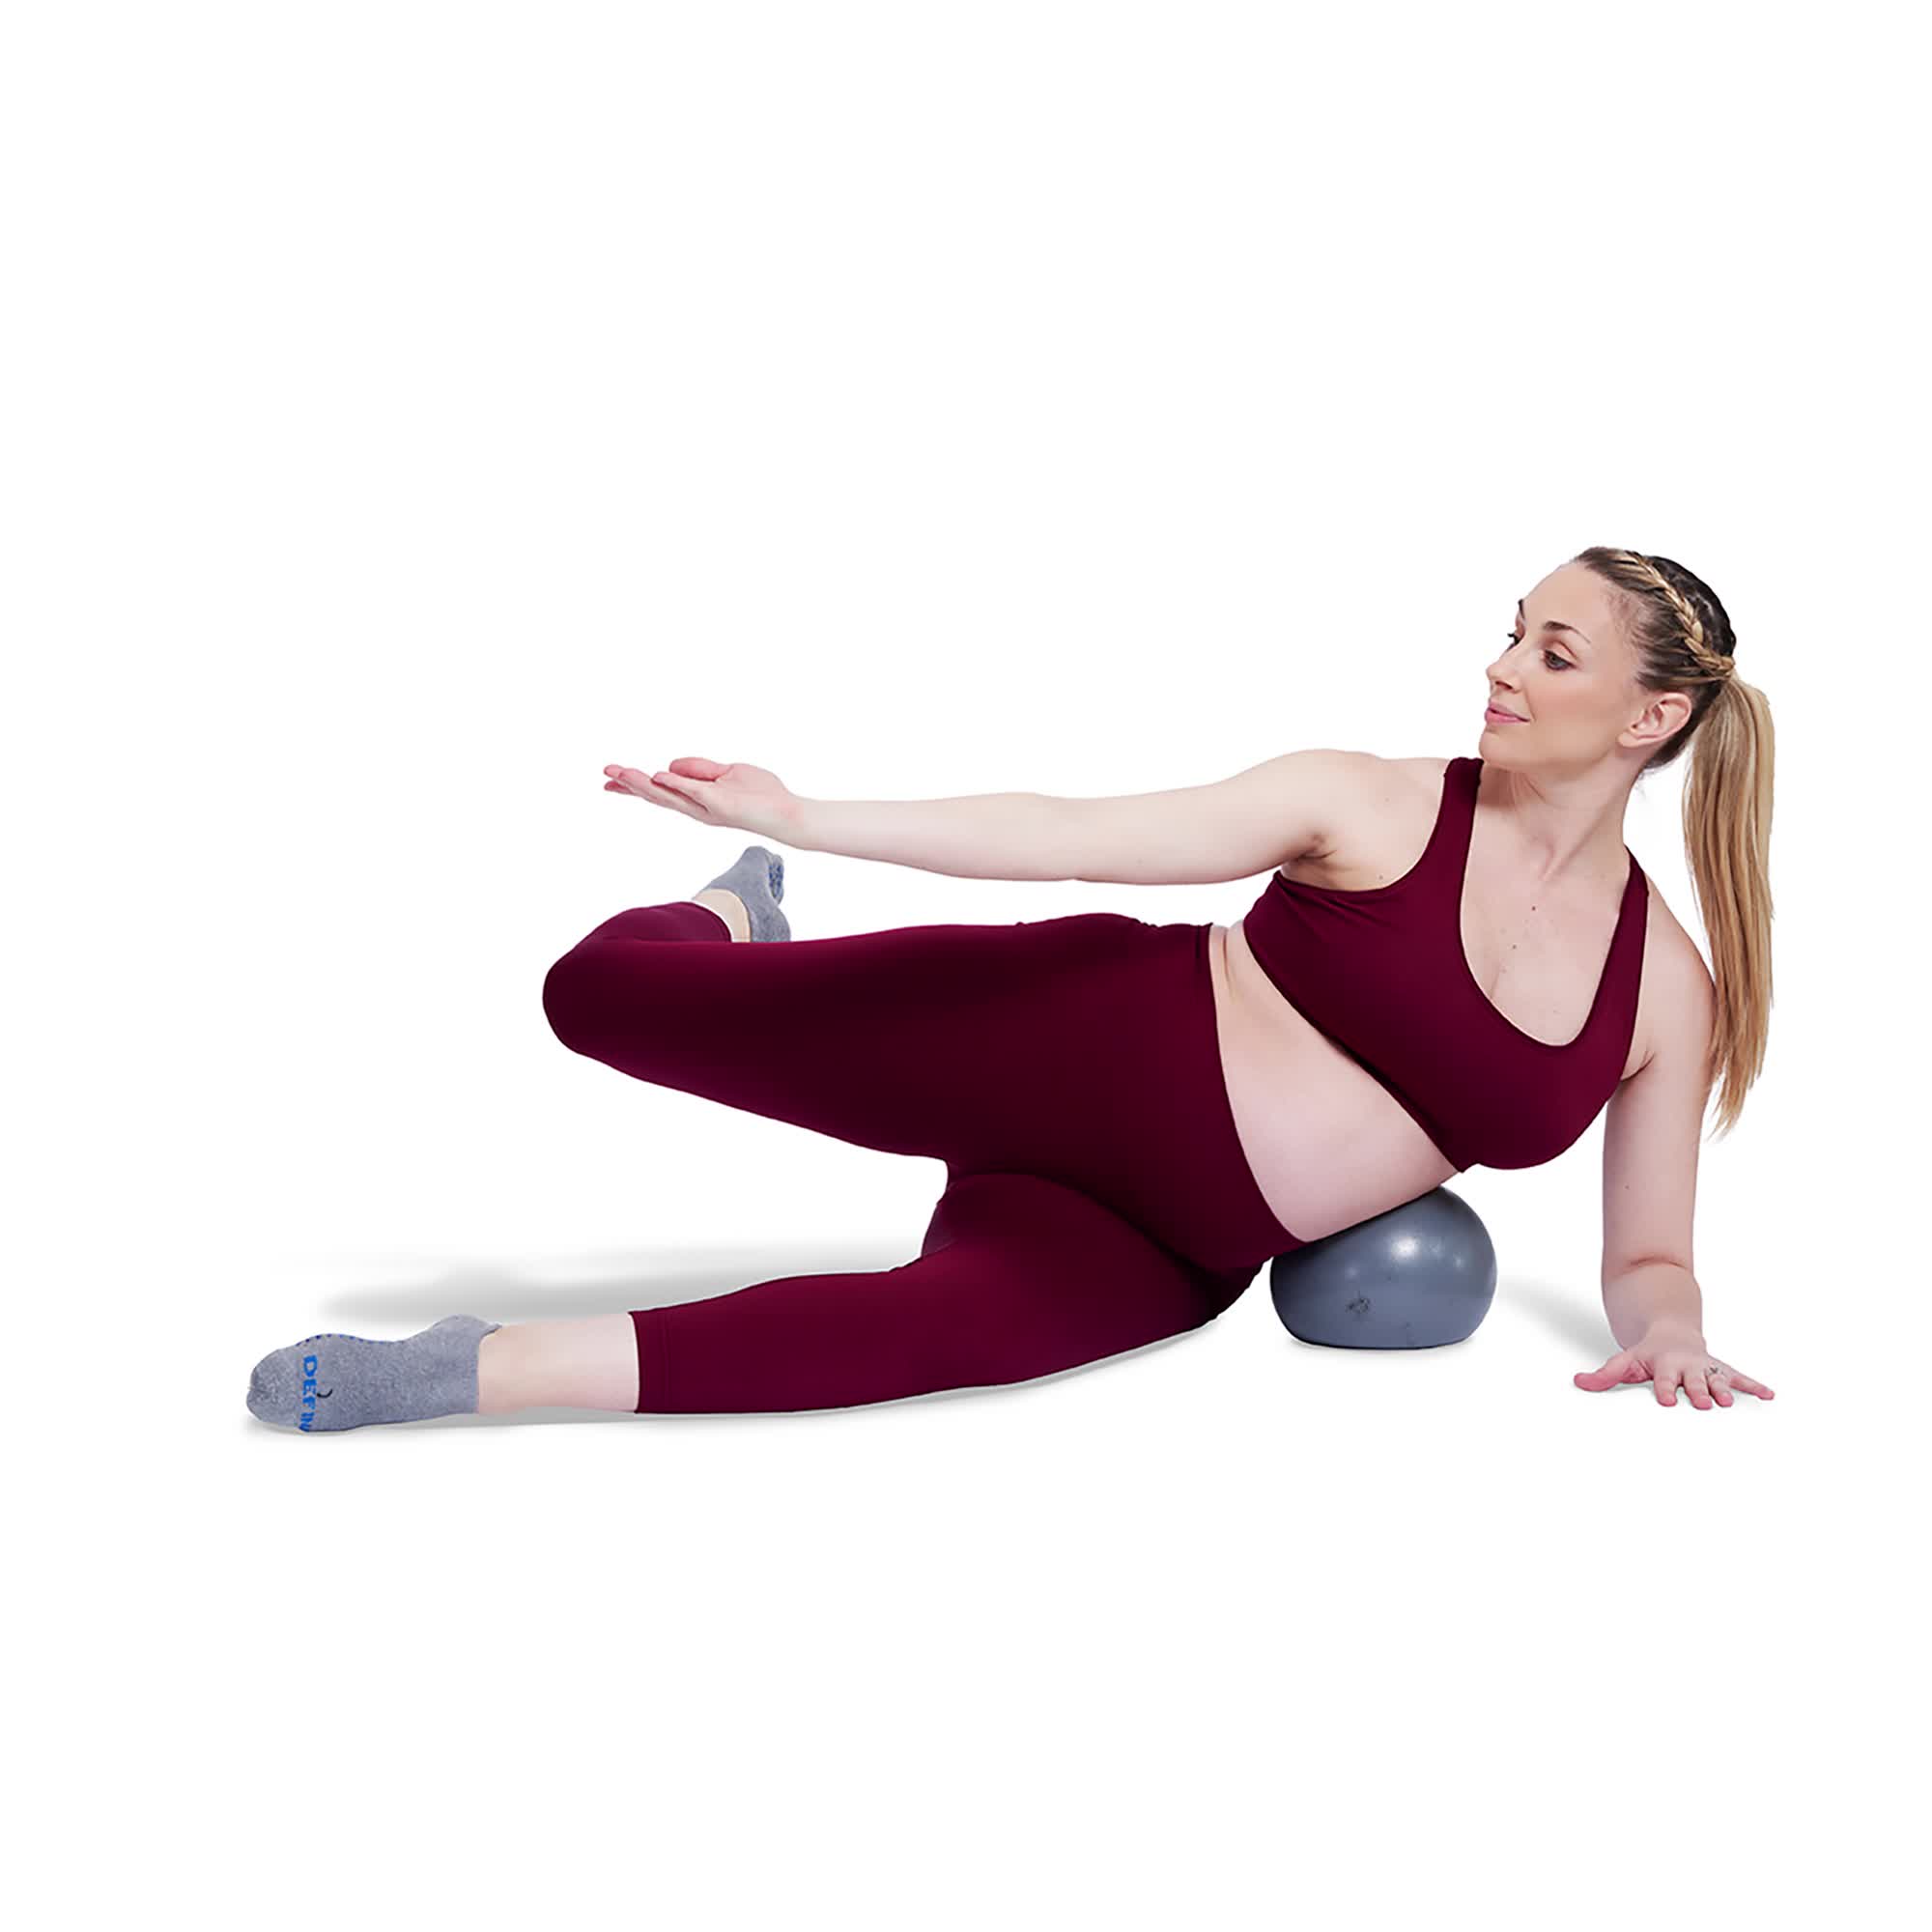 Things to keep in mind before you begin a prenatal exercise